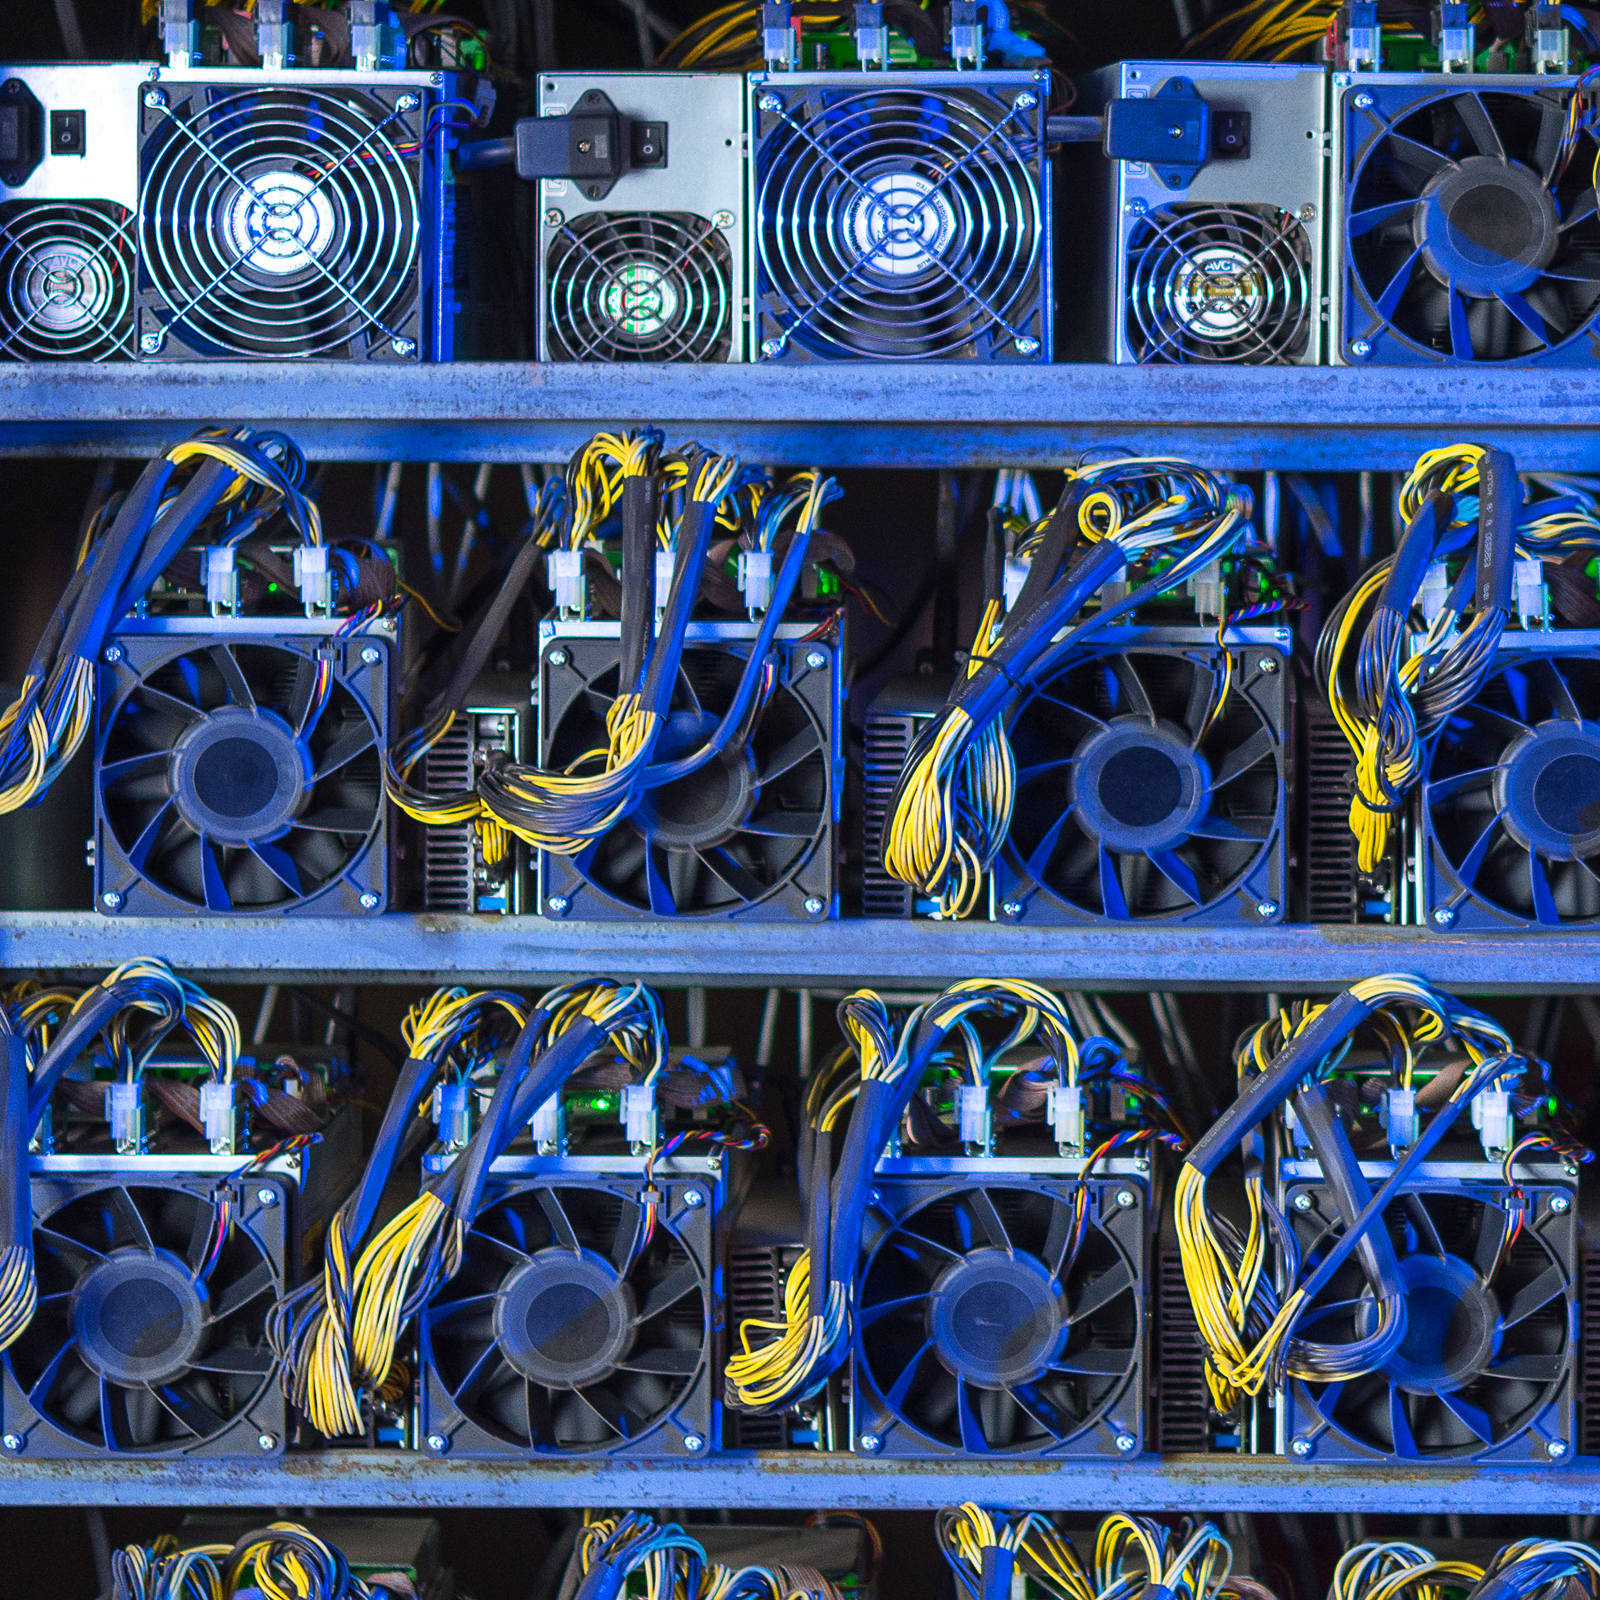 The Curious Case of the New 'Dragonmint Bitcoin Miner'